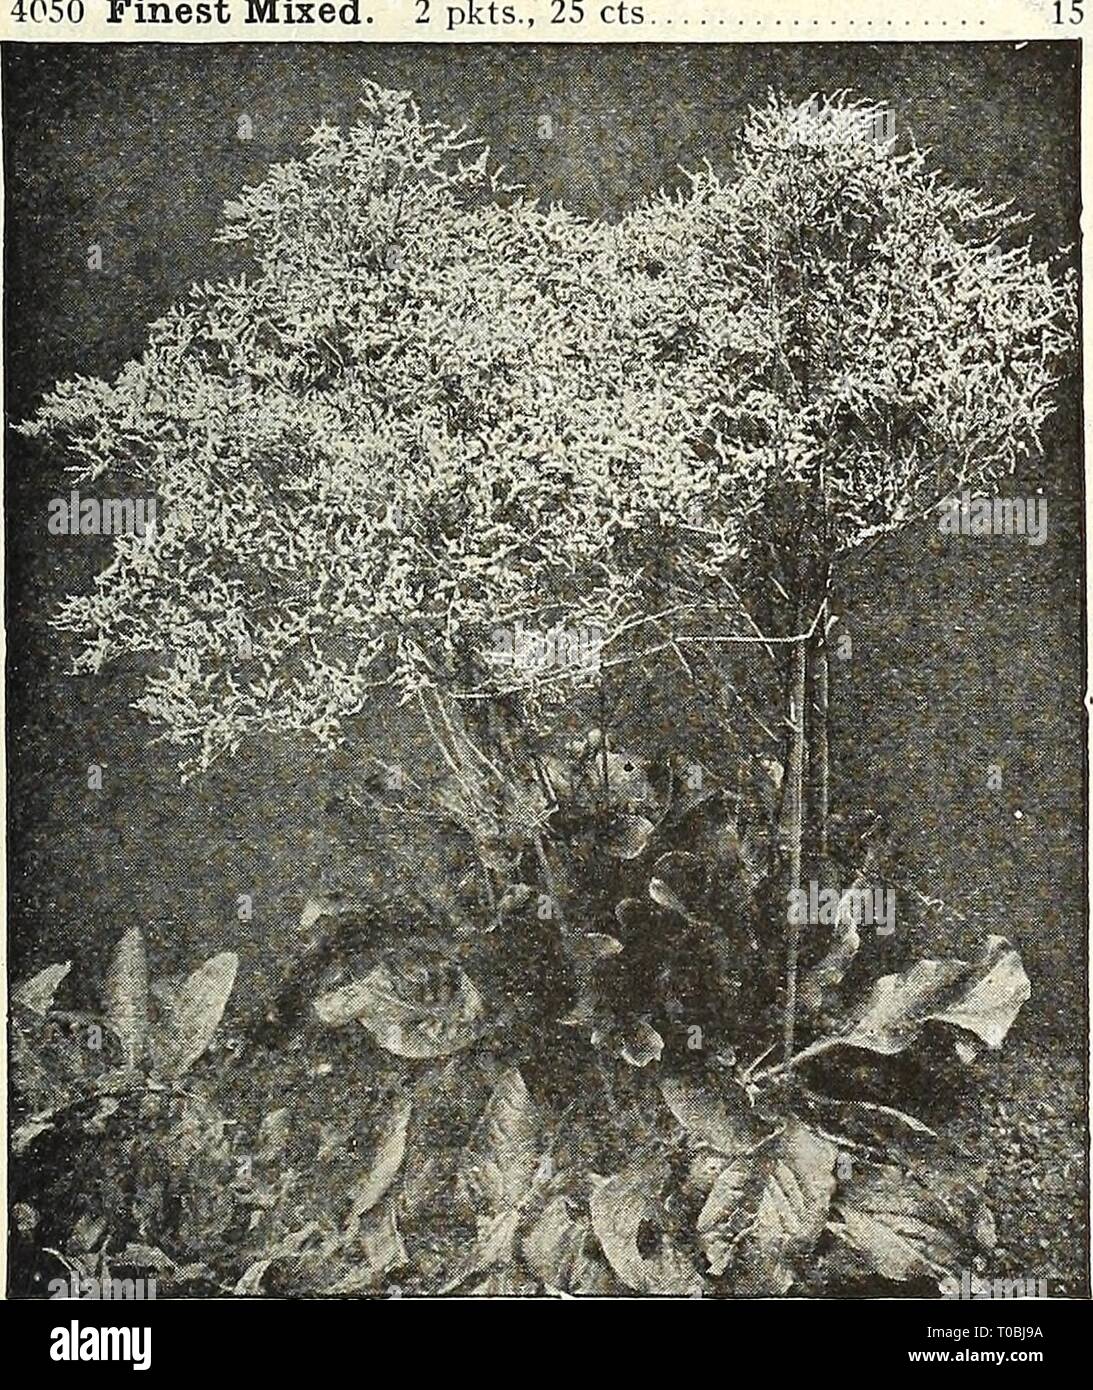 Dreer's garden book 1928 (1928) Dreer's garden book 1928 dreersgardenbook1928henr Year: 1928  10 IS Statice Latifolia Cut-and-Come-Again Stocks SmilaX (Myrsiphyllum Asparagoides) PER PKT. 3981 In many respects Smilax is the most, useful, and it is certainly one of the most graceful climbers which adorns the greenhouse or conservatory; for bouquets and floral decorations it is indispensable.  oz., 25 cts. Solanum (Jerusalem Cherry) 3994 Cleveland Red. A greatly improved form of this very useful pot plant for winter decoration. It is of dwarf, branching habit; leaves small and oval shaped, bear Stock Photo